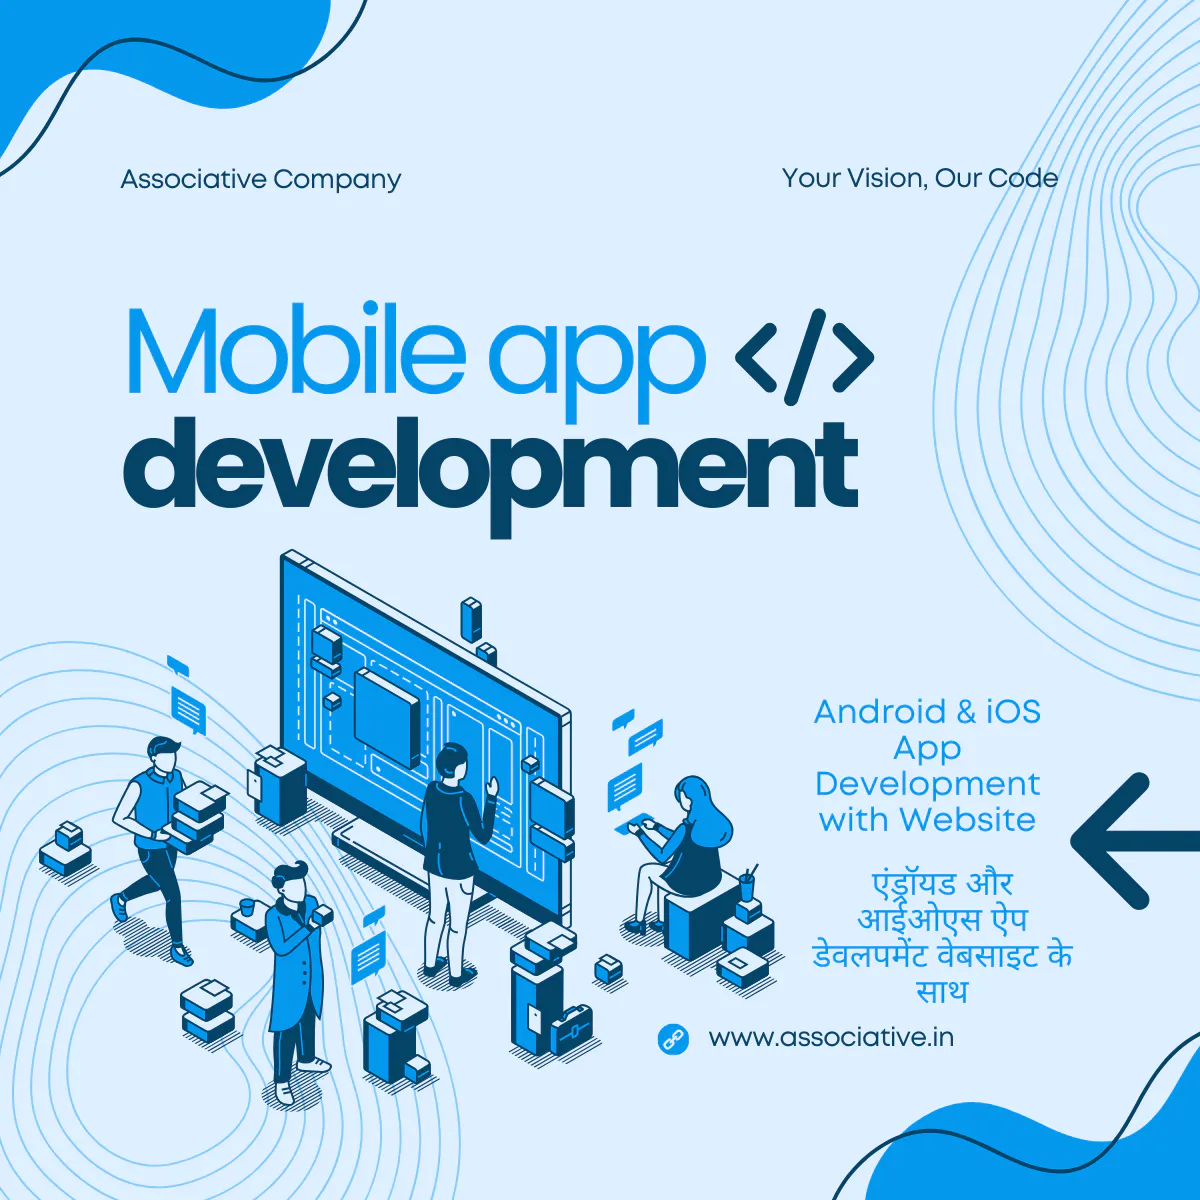 Android & iOS App Development with Website